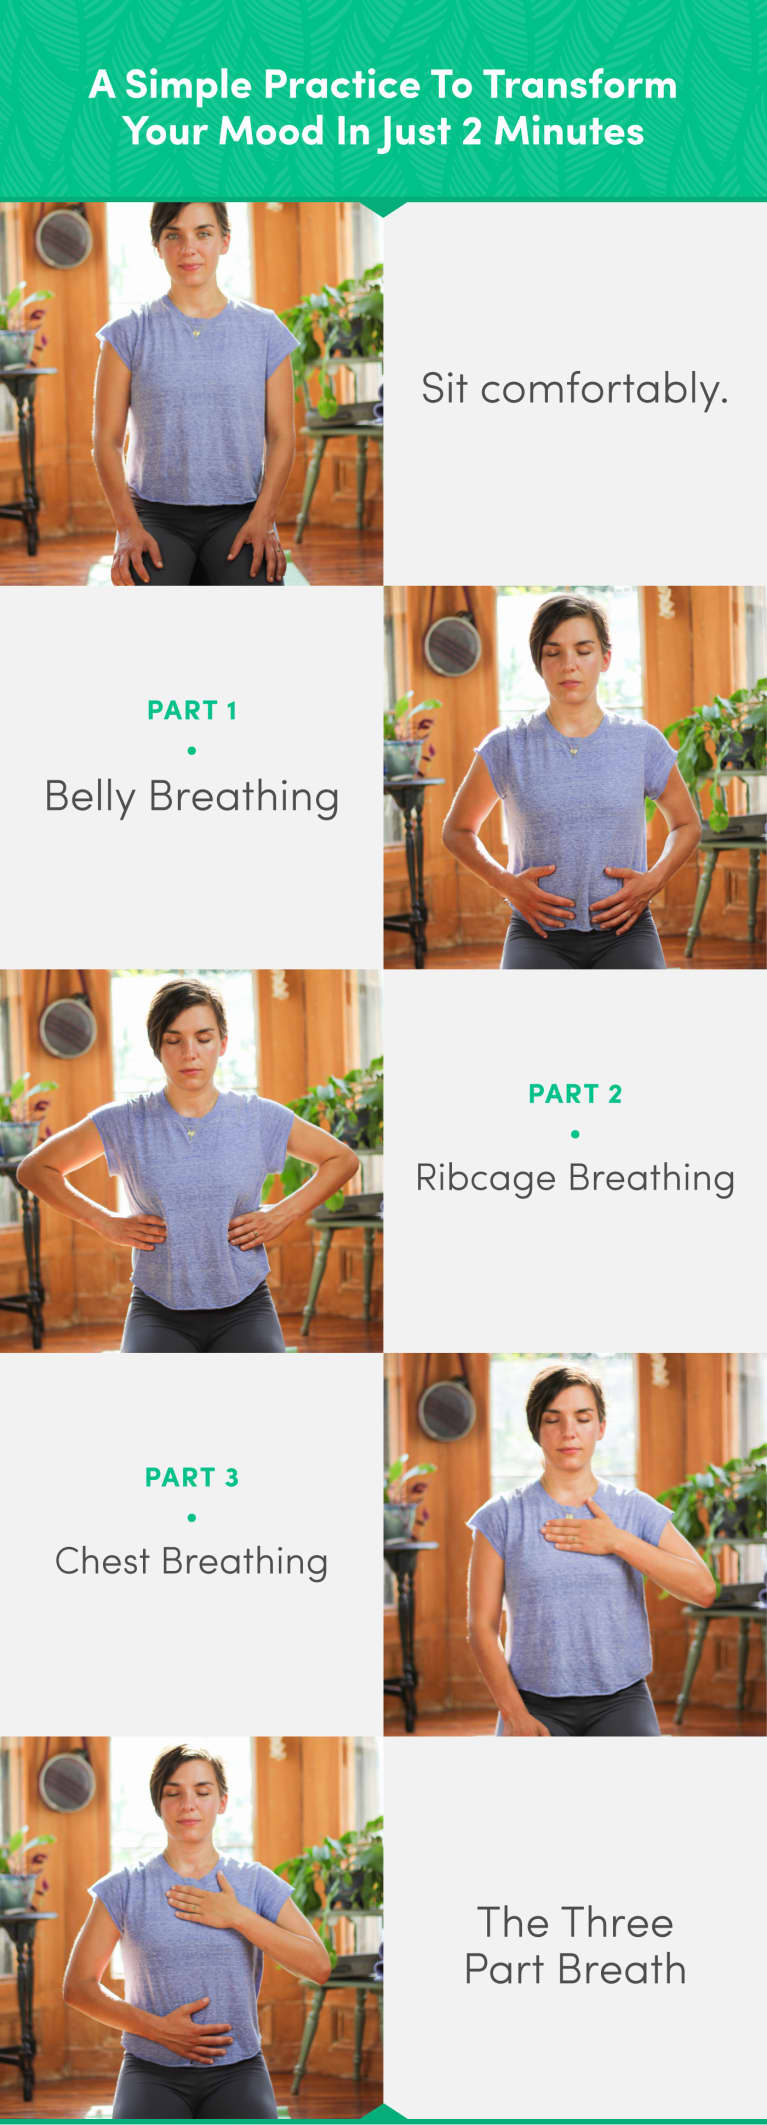 Transform Your Mood In 2 Minutes With This Simple Breathing Practice